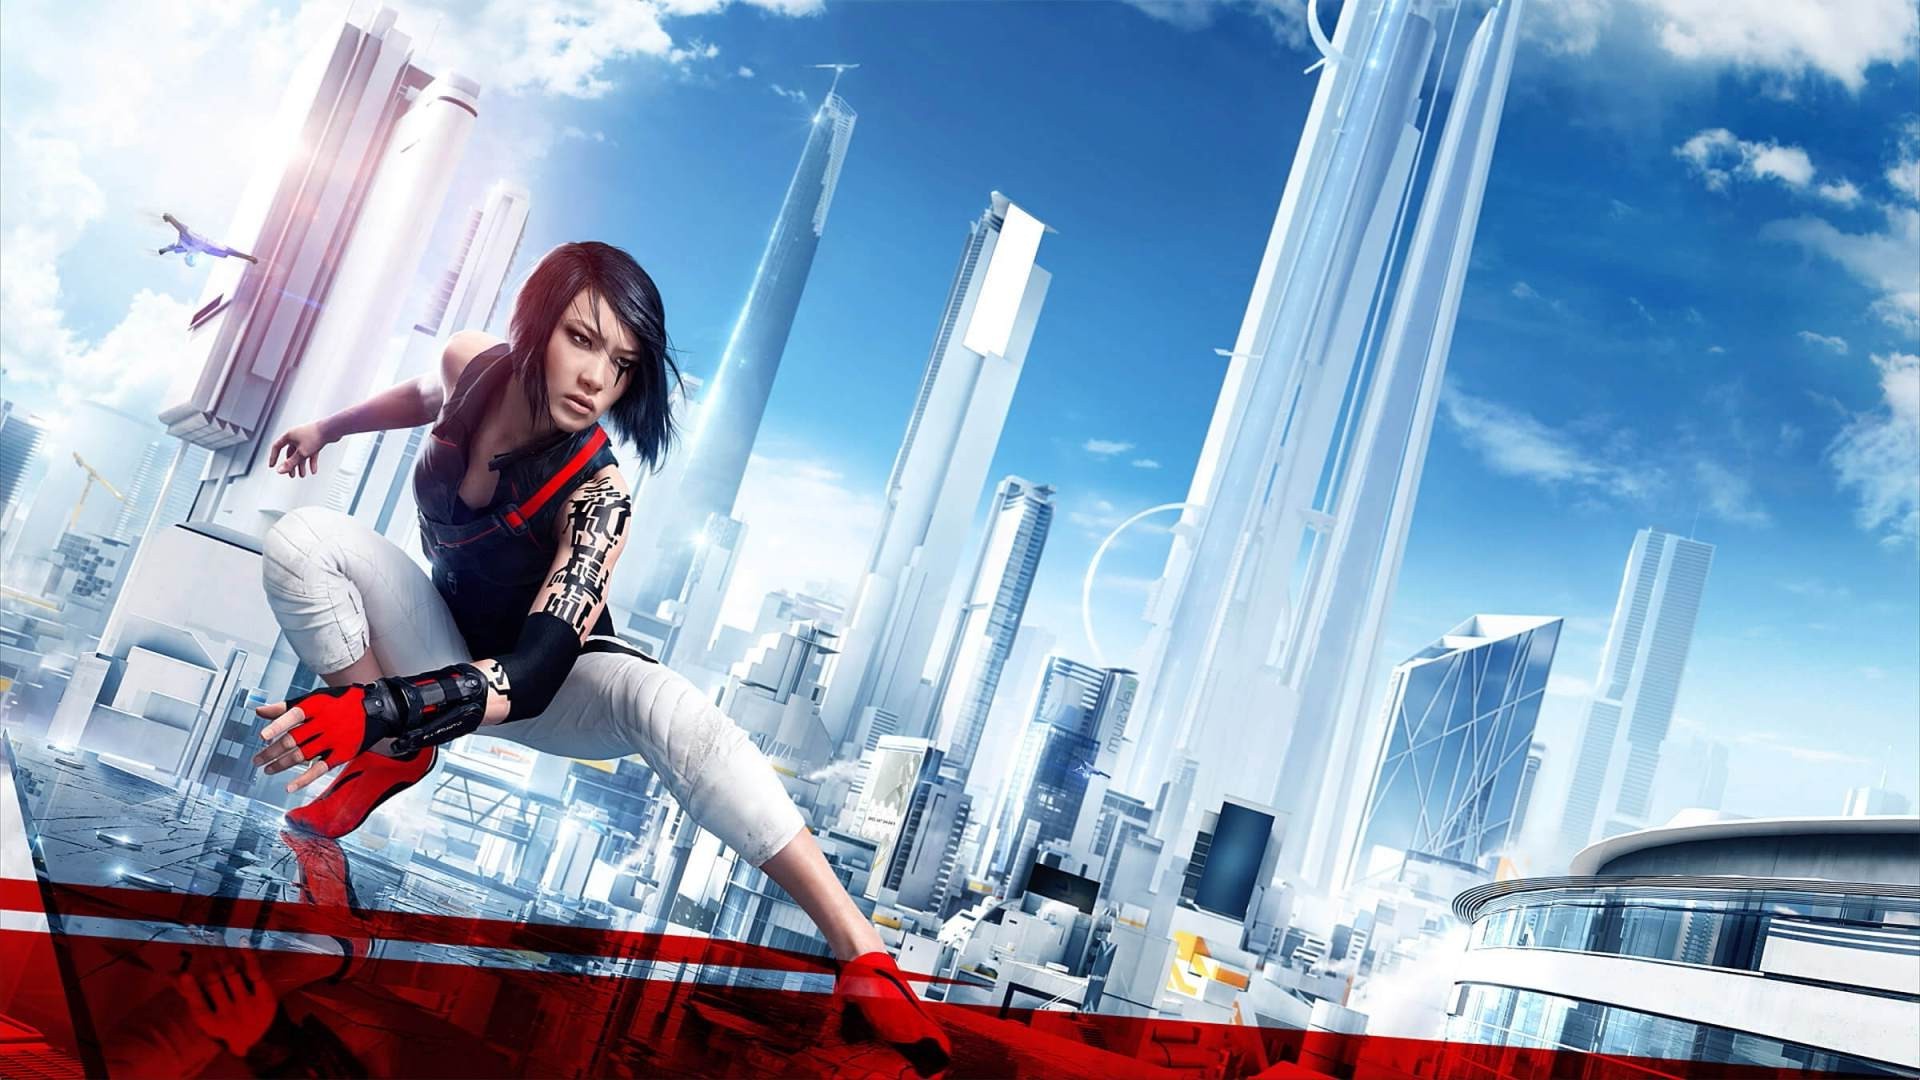 Free download mirrors edge hd wallpapers and background images stmednet x for your desktop mobile tablet explore mirrors edge wallpapers wallpaper for s edge s edge wallpapers s edge wallpaper